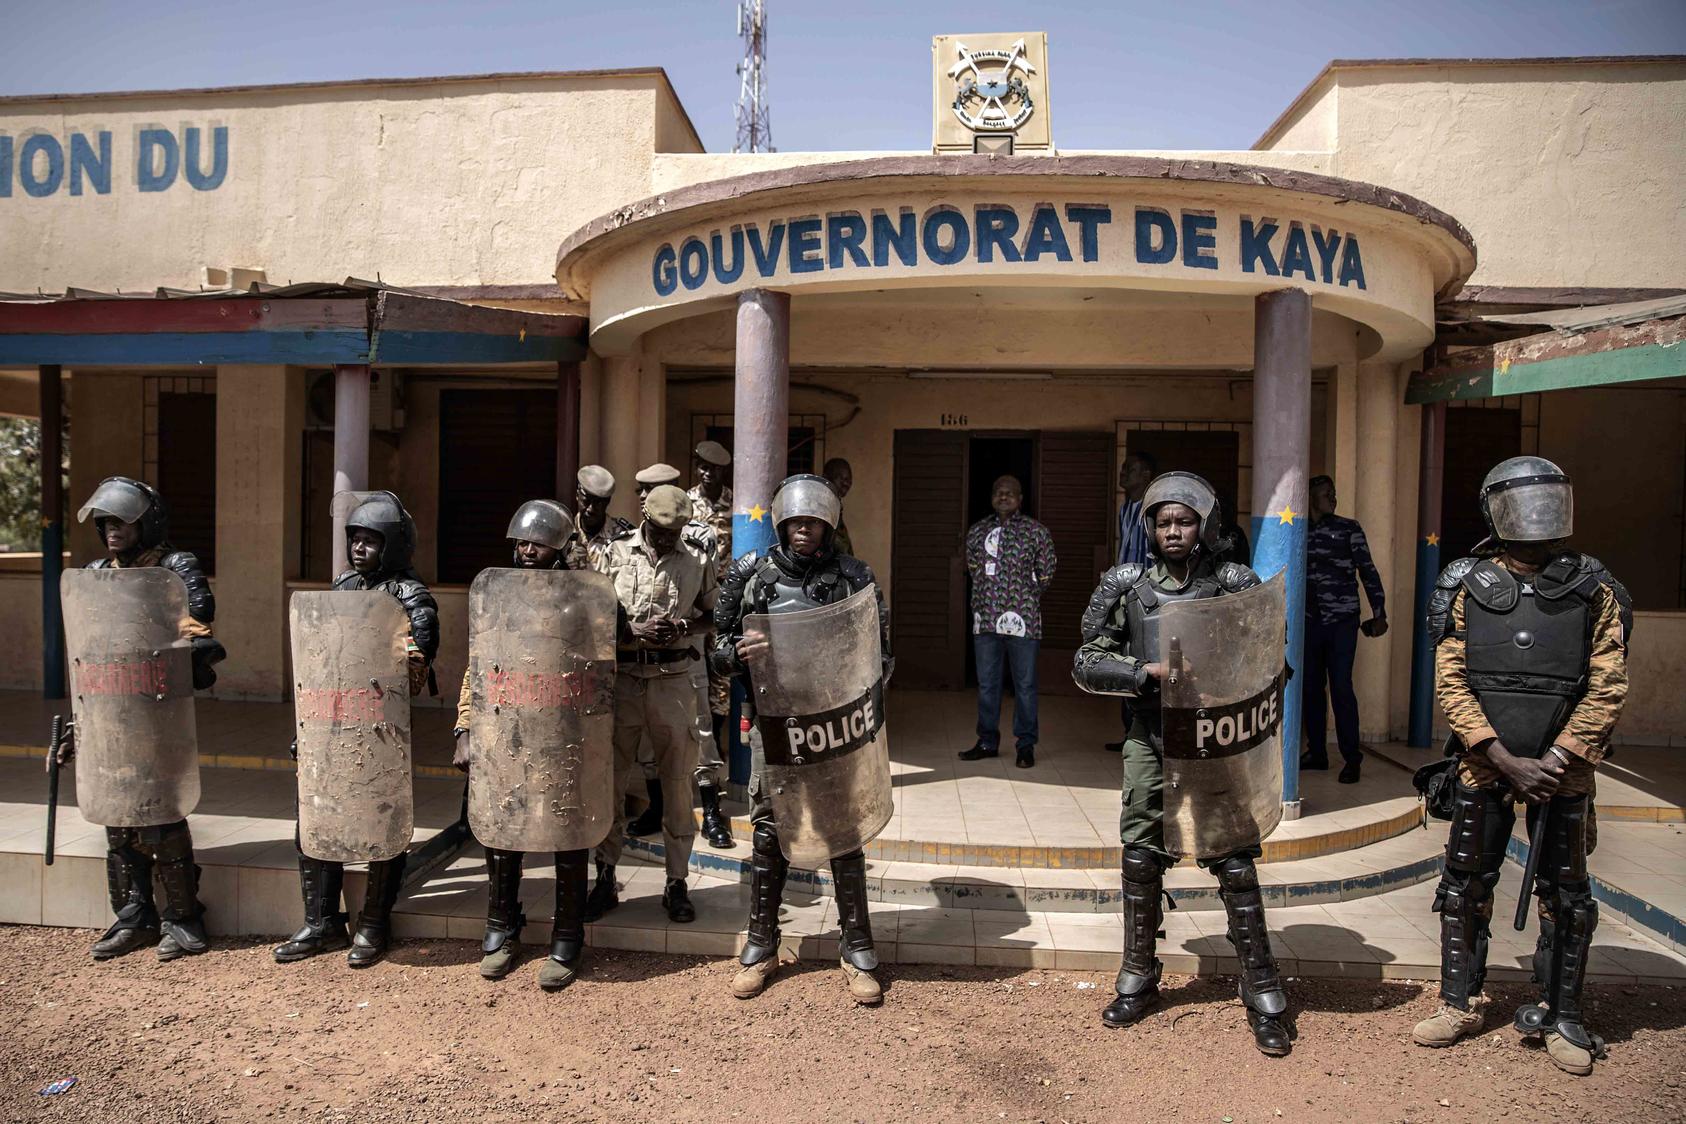 Burkina Faso police protect a provincial governor’s office following protests in 2020. Burkina Faso faces extremist violence and has seen citizens’ protests over problems of governance, as in the town of Manga. (Finnbarr O'Reilly/The New York Times)